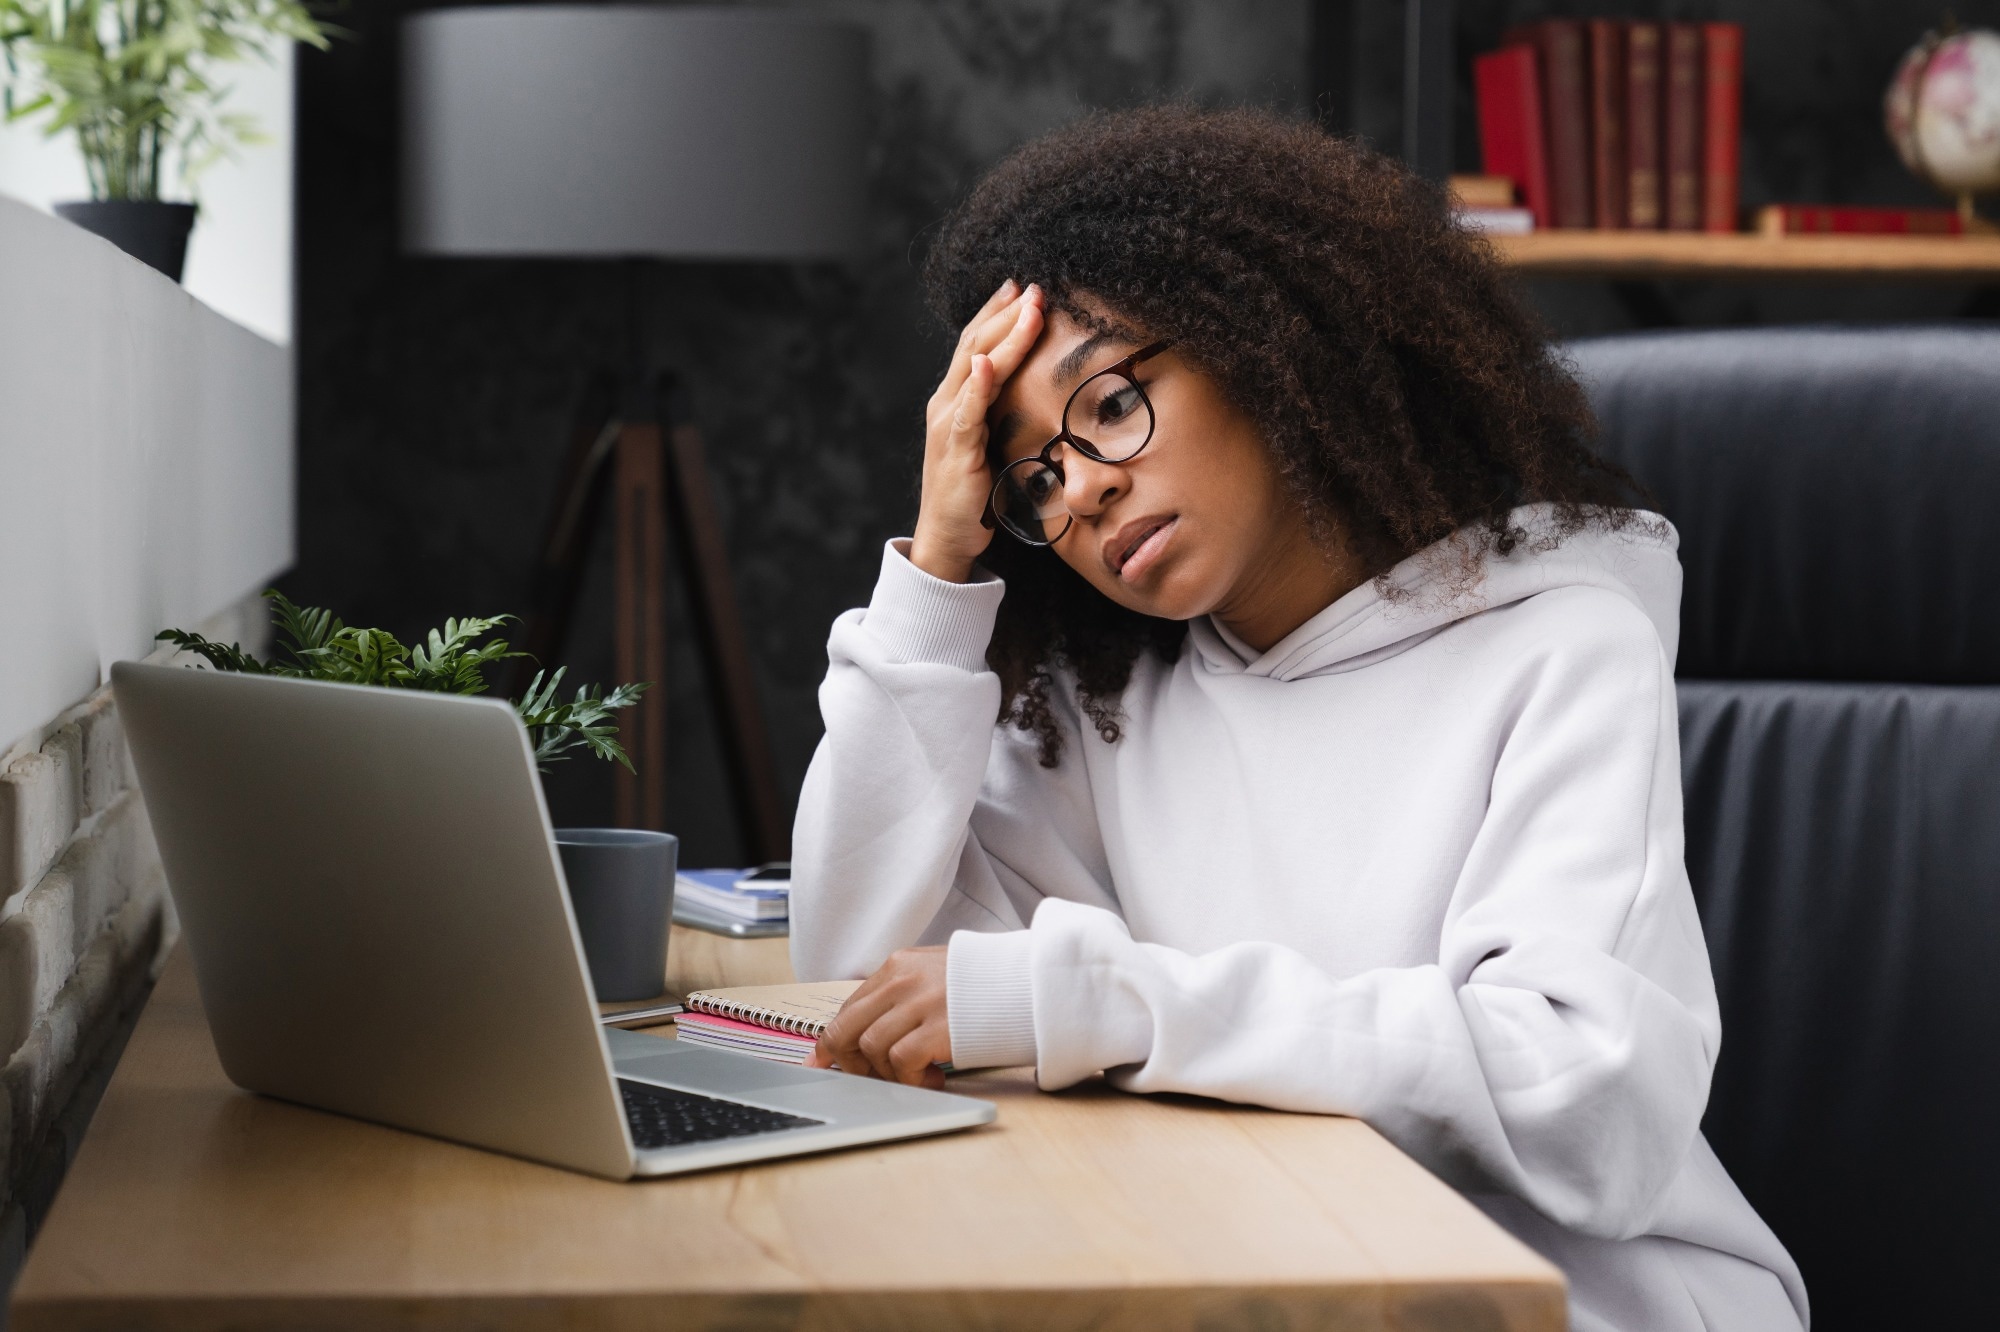 Study: The burden of psychological distress and unhealthy dietary behaviours among 222,401 school-going adolescents from 61 countries. Image Credit: Inside Creative House / Shutterstock.com